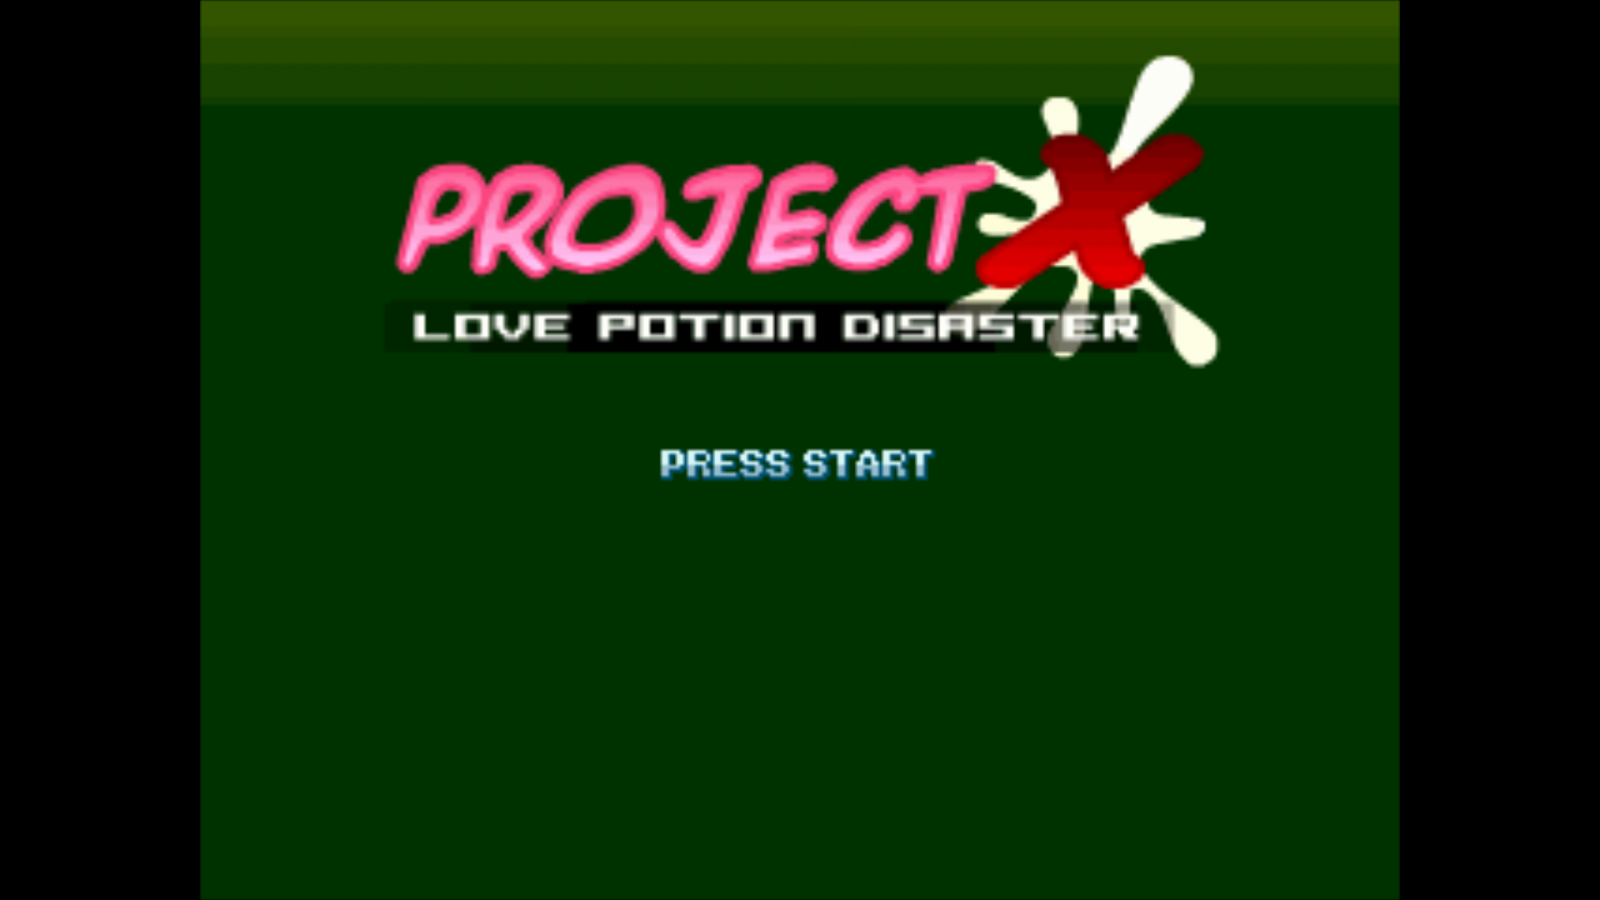 project x love potion disaster download full